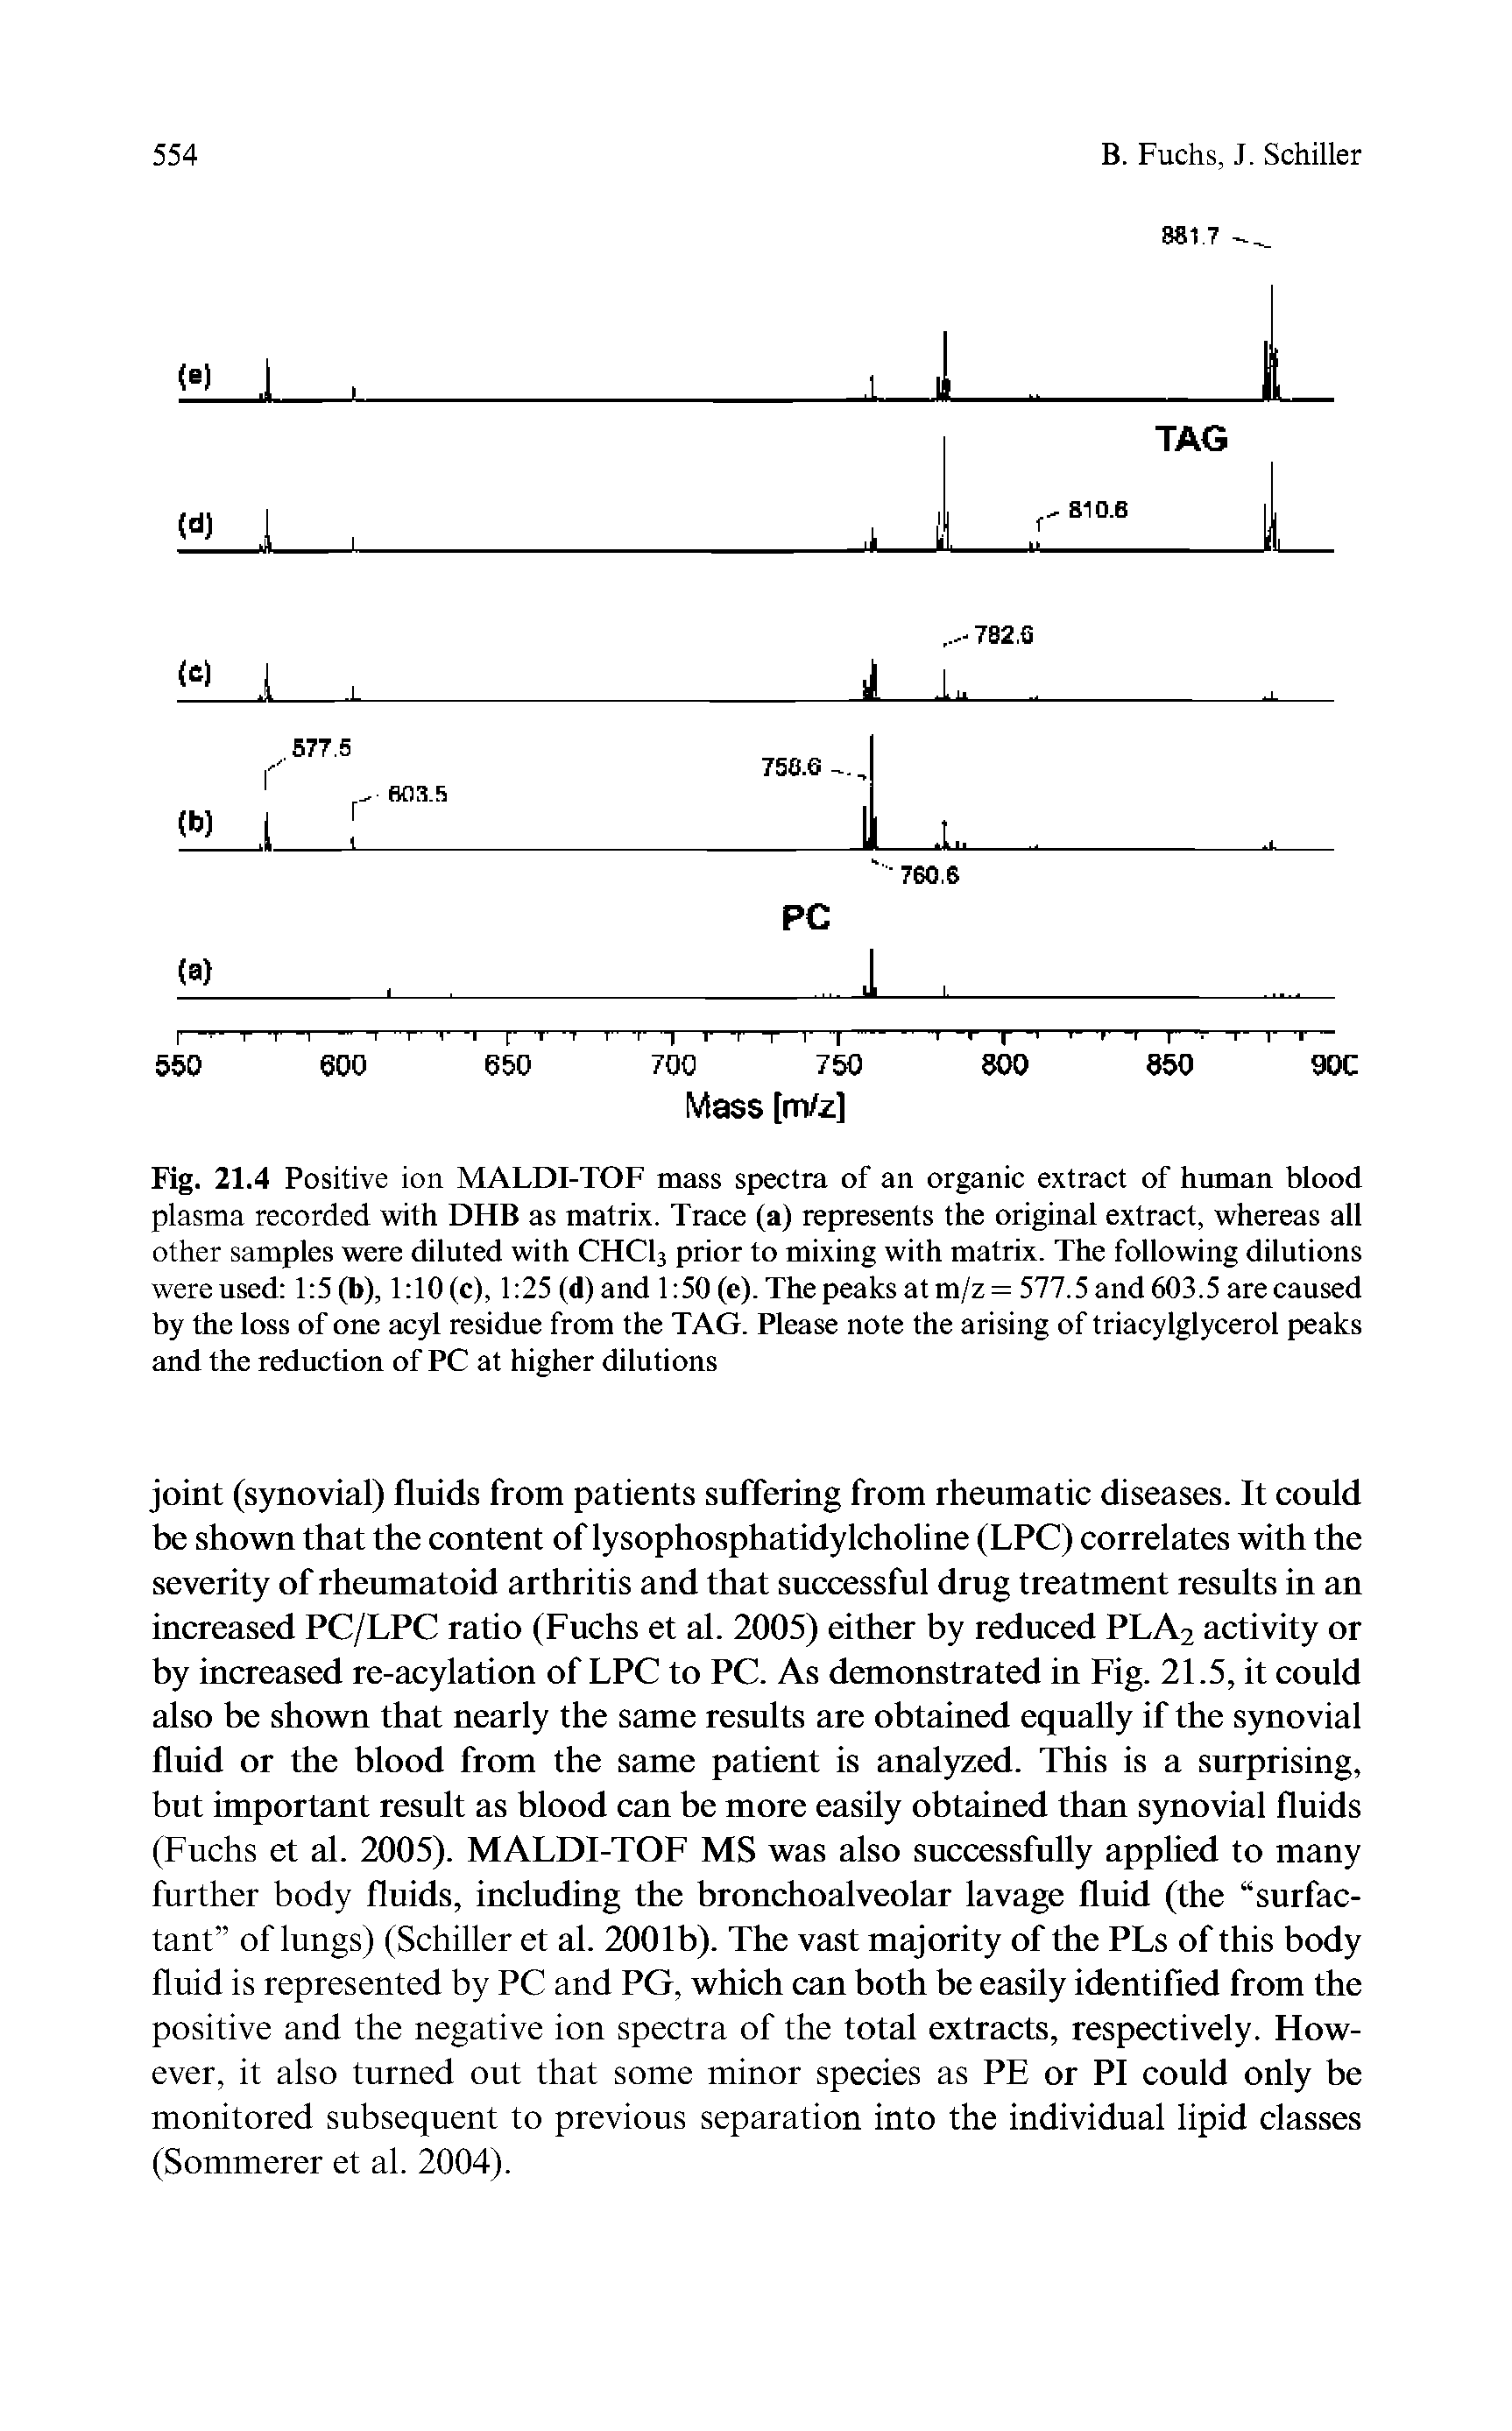 Fig. 21.4 Positive ion MALDI-TOF mass spectra of an organic extract of human blood plasma recorded with DFiB as matrix. Trace (a) represents the original extract, whereas all other samples were diluted with CHCI3 prior to mixing with matrix. The following dilutions were used 1 5 (b), 1 10 (c), 1 25 (d)and 1 50 (e). The peaks at m/z = 577.5 and 603.5 are caused by the loss of one acyl residue from the TAG. Please note the arising of triacylglycerol peaks and the reduction of PC at higher dilutions...